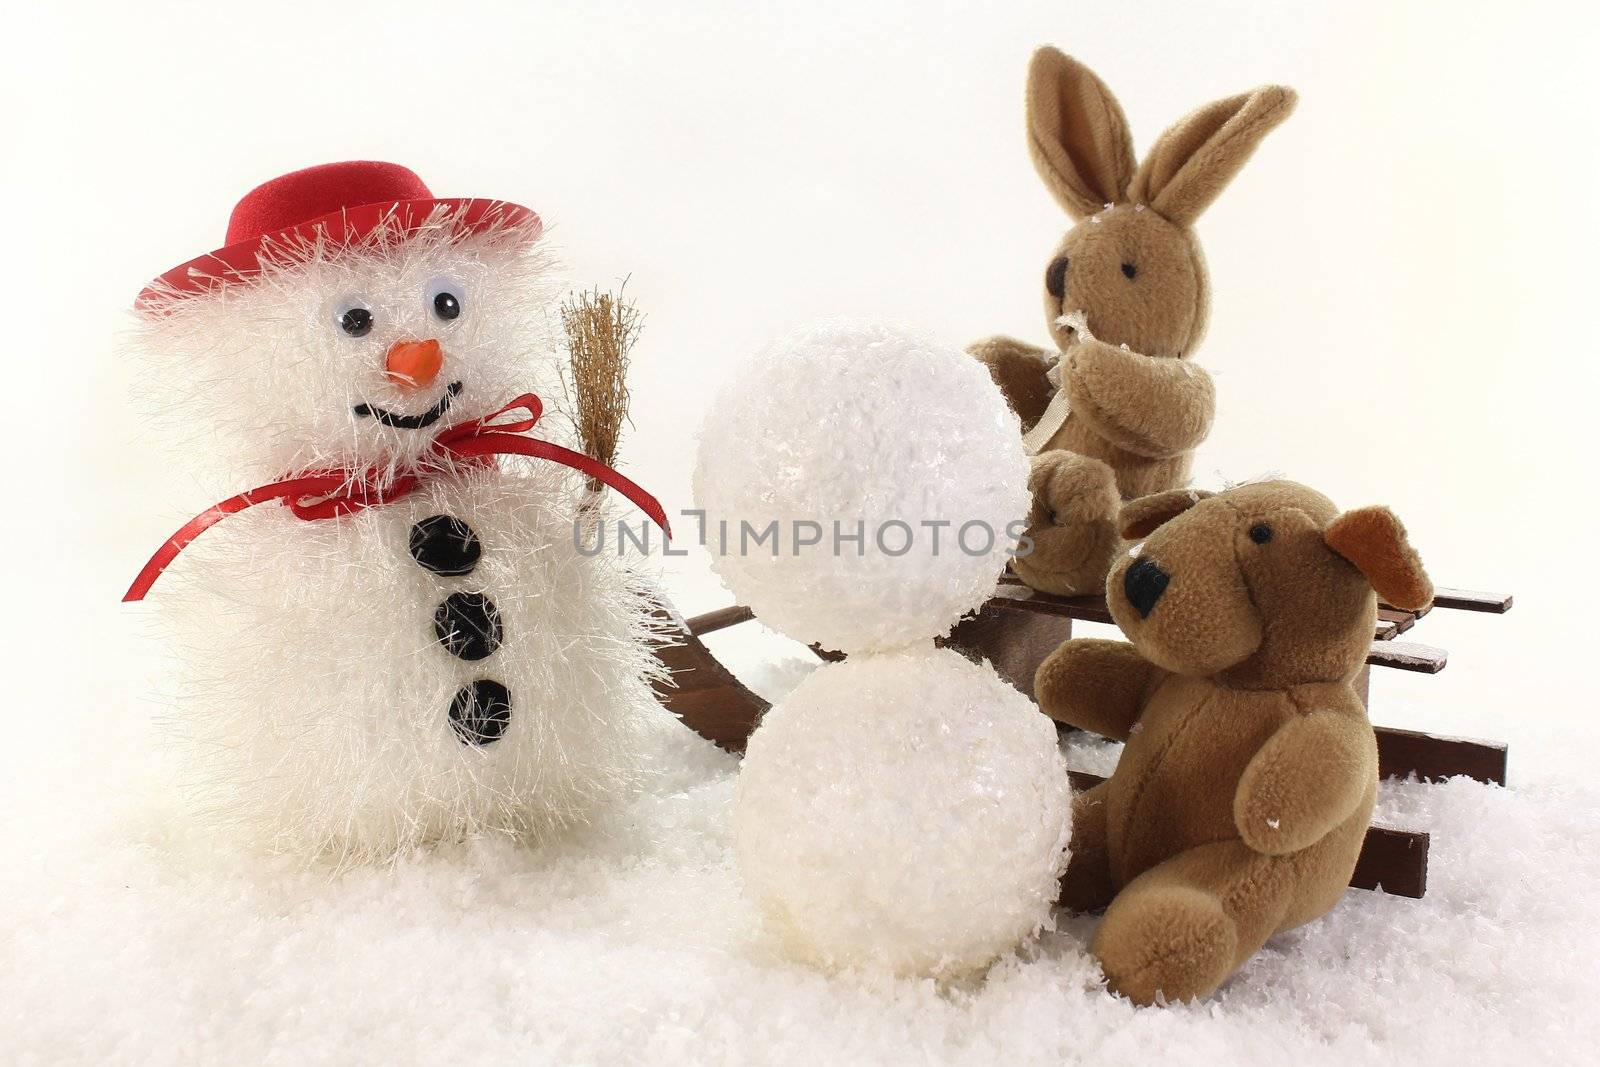 Snowman and stuffed animals for winter fun